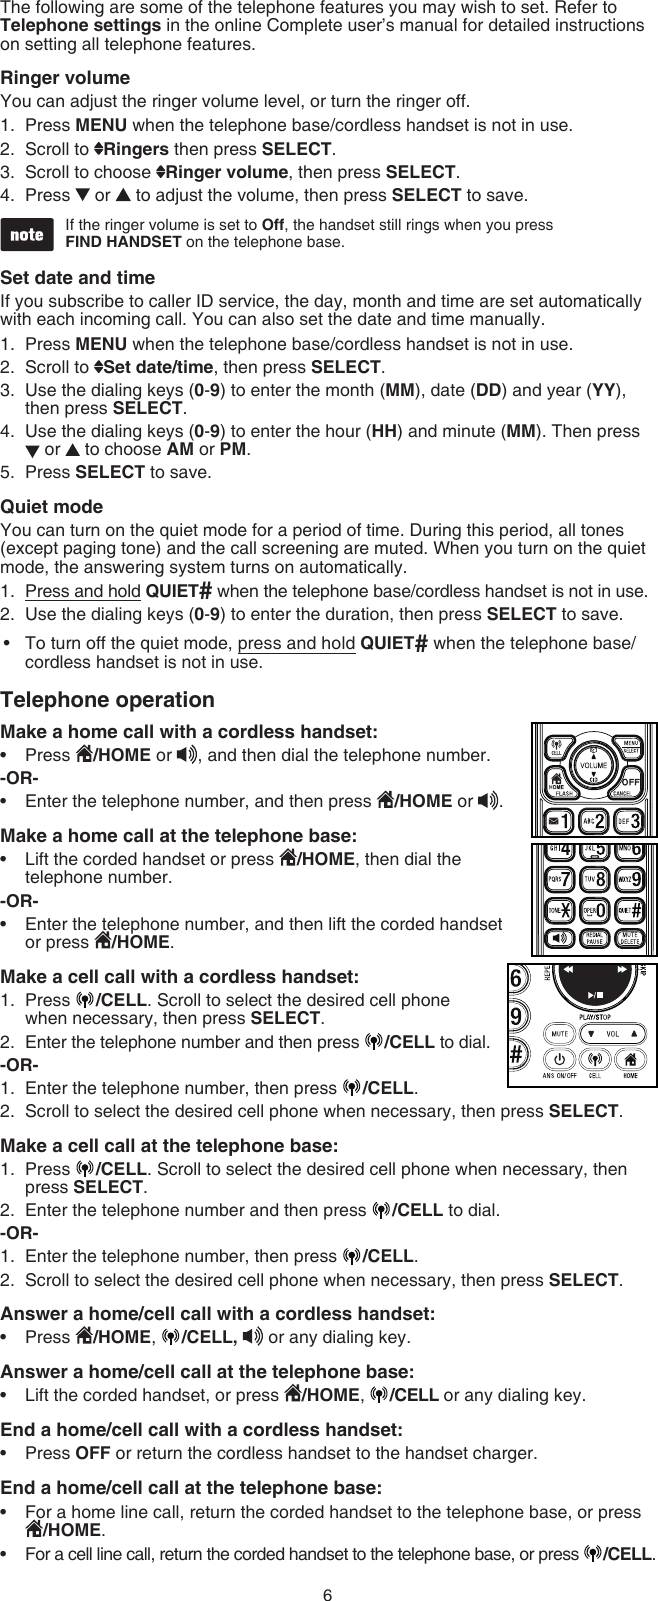 6The following are some of the telephone features you may wish to set. Refer to Telephone settings in the online Complete user’s manual for detailed instructions on setting all telephone features.Ringer volumeYou can adjust the ringer volume level, or turn the ringer off.Press MENU when the telephone base/cordless handset is not in use.Scroll to  Ringers then press SELECT.Scroll to choose  Ringer volume, then press SELECT.Press   or   to adjust the volume, then press SELECT to save.If the ringer volume is set to Off, the handset still rings when you press  FIND HANDSET on the telephone base.Set date and timeIf you subscribe to caller ID service, the day, month and time are set automatically with each incoming call. You can also set the date and time manually.Press MENU when the telephone base/cordless handset is not in use.Scroll to  Set date/time, then press SELECT.Use the dialing keys (0-9) to enter the month (MM), date (DD) and year (YY), then press SELECT.Use the dialing keys (0-9) to enter the hour (HH) and minute (MM). Then press   or   to choose AM or PM.Press SELECT to save. Quiet modeYou can turn on the quiet mode for a period of time. During this period, all tones (except paging tone) and the call screening are muted. When you turn on the quiet mode, the answering system turns on automatically.Press and hold QUIET# when the telephone base/cordless handset is not in use.Use the dialing keys (0-9) to enter the duration, then press SELECT to save.To turn off the quiet mode, press and hold QUIET# when the telephone base/cordless handset is not in use.Telephone operationMake a home call with a cordless handset:Press  /HOME or , and then dial the telephone number.-OR-Enter the telephone number, and then press  /HOME or .Make a home call at the telephone base:Lift the corded handset or press  /HOME, then dial the telephone number.-OR-Enter the telephone number, and then lift the corded handset or press  /HOME.Make a cell call with a cordless handset:Press  /CELL. Scroll to select the desired cell phone when necessary, then press SELECT. Enter the telephone number and then press  /CELL to dial.-OR-Enter the telephone number, then press  /CELL.Scroll to select the desired cell phone when necessary, then press SELECT.Make a cell call at the telephone base:Press  /CELL. Scroll to select the desired cell phone when necessary, then press SELECT. Enter the telephone number and then press  /CELL to dial.-OR-Enter the telephone number, then press  /CELL.Scroll to select the desired cell phone when necessary, then press SELECT.Answer a home/cell call with a cordless handset:Press  /HOME,  /CELL,   or any dialing key.Answer a home/cell call at the telephone base:Lift the corded handset, or press  /HOME,  /CELL or any dialing key.End a home/cell call with a cordless handset:Press OFF or return the cordless handset to the handset charger.End a home/cell call at the telephone base:For a home line call, return the corded handset to the telephone base, or press /HOME.For a cell line call, return the corded handset to the telephone base, or press  /CELL.1.2.3.4.1.2.3.4.5.1.2.•••••1.2.1.2.1.2.1.2.•••••